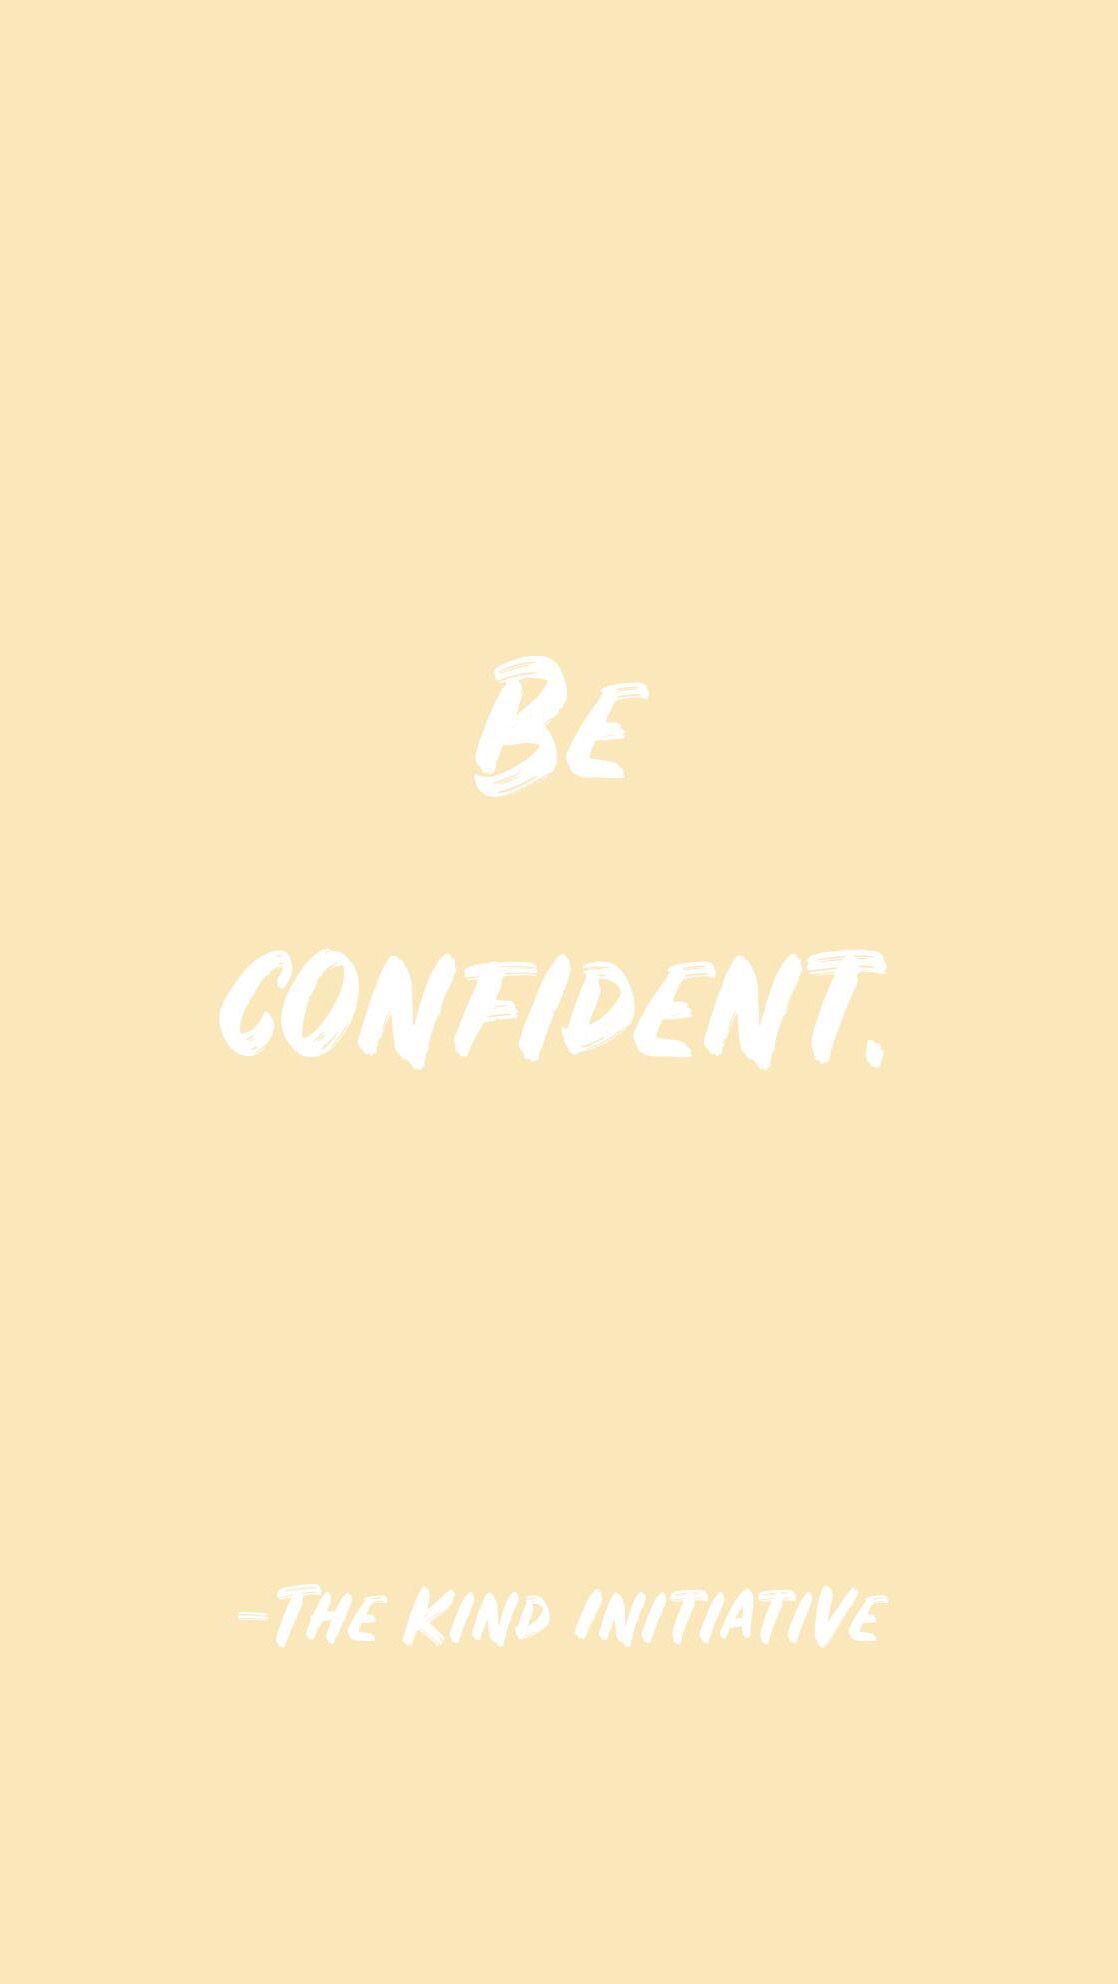 Confidence Wallpapers